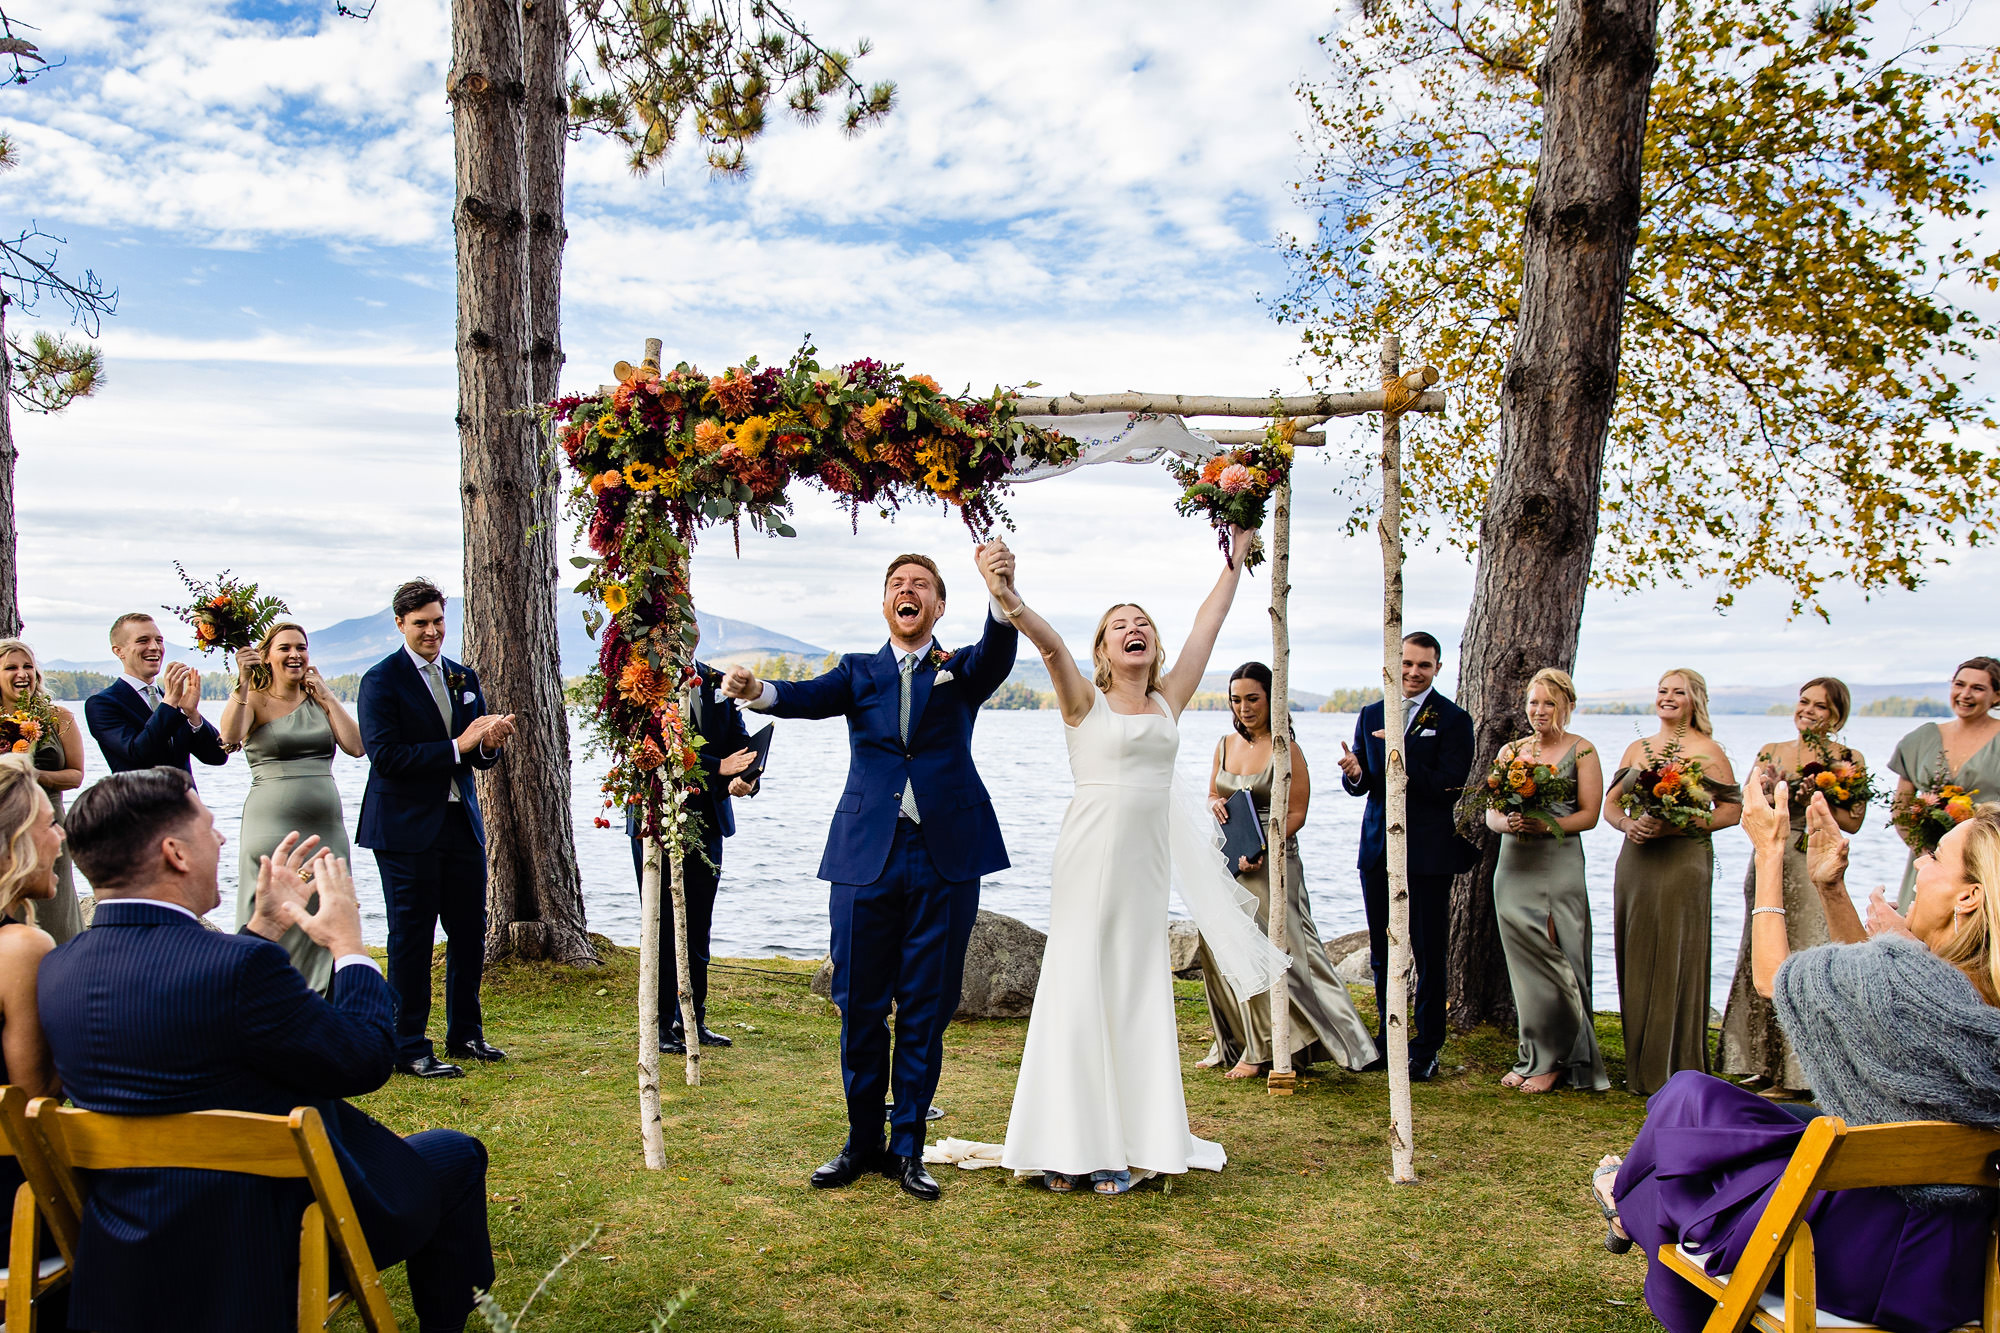 A wedding couple raise their arms in celebration after being announced as married in front of their loved ones.